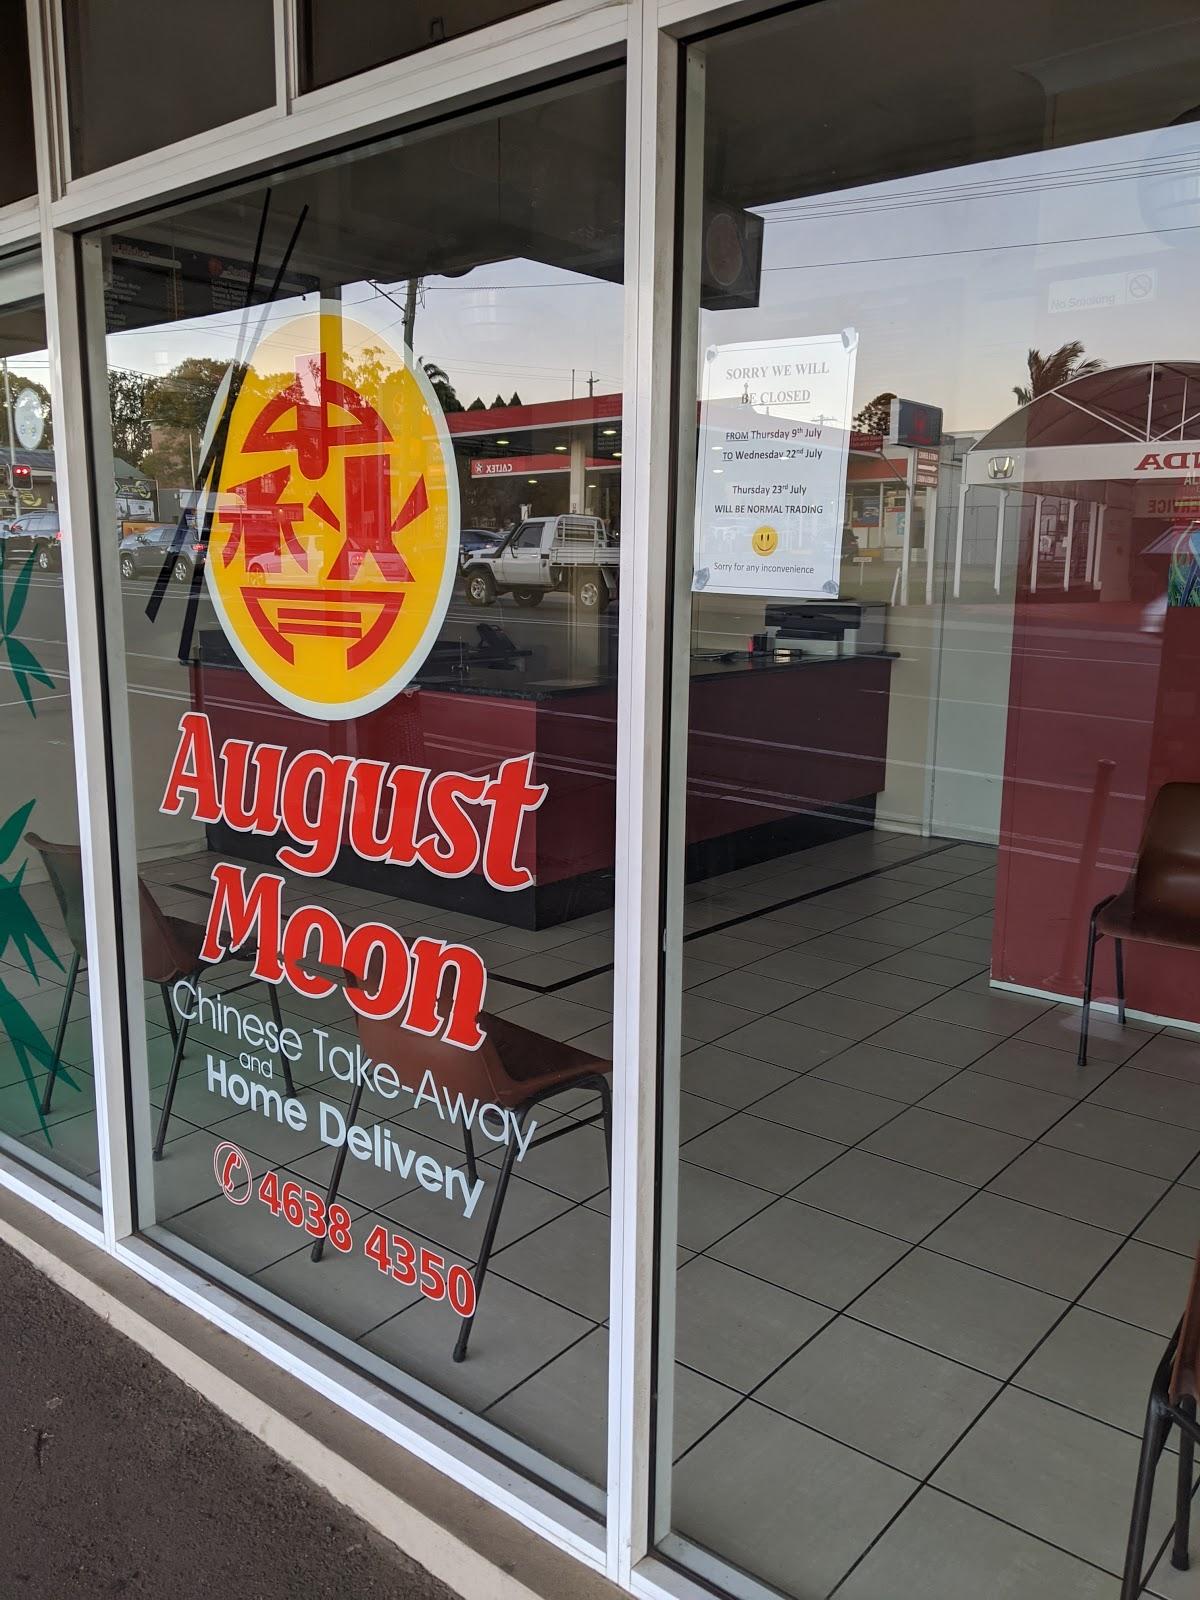 August Moon 625 Ruthven St In Toowoomba City Restaurant Reviews